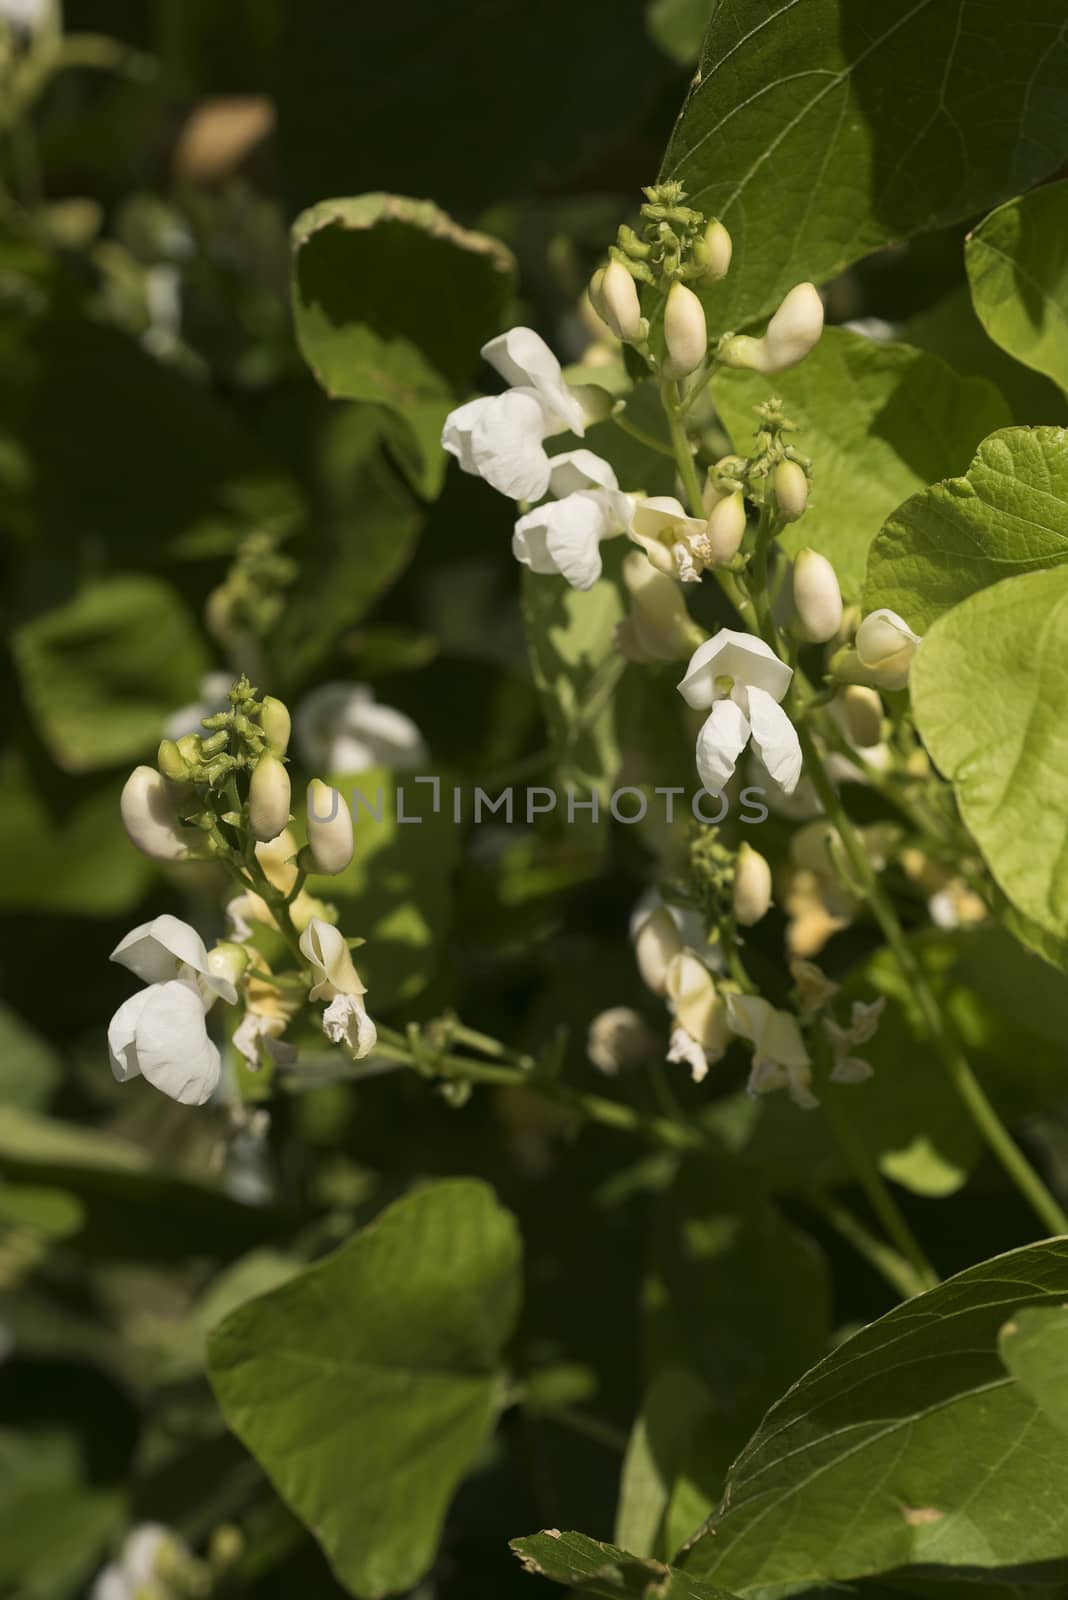 Bean plants in the garden, flower by jalonsohu@gmail.com